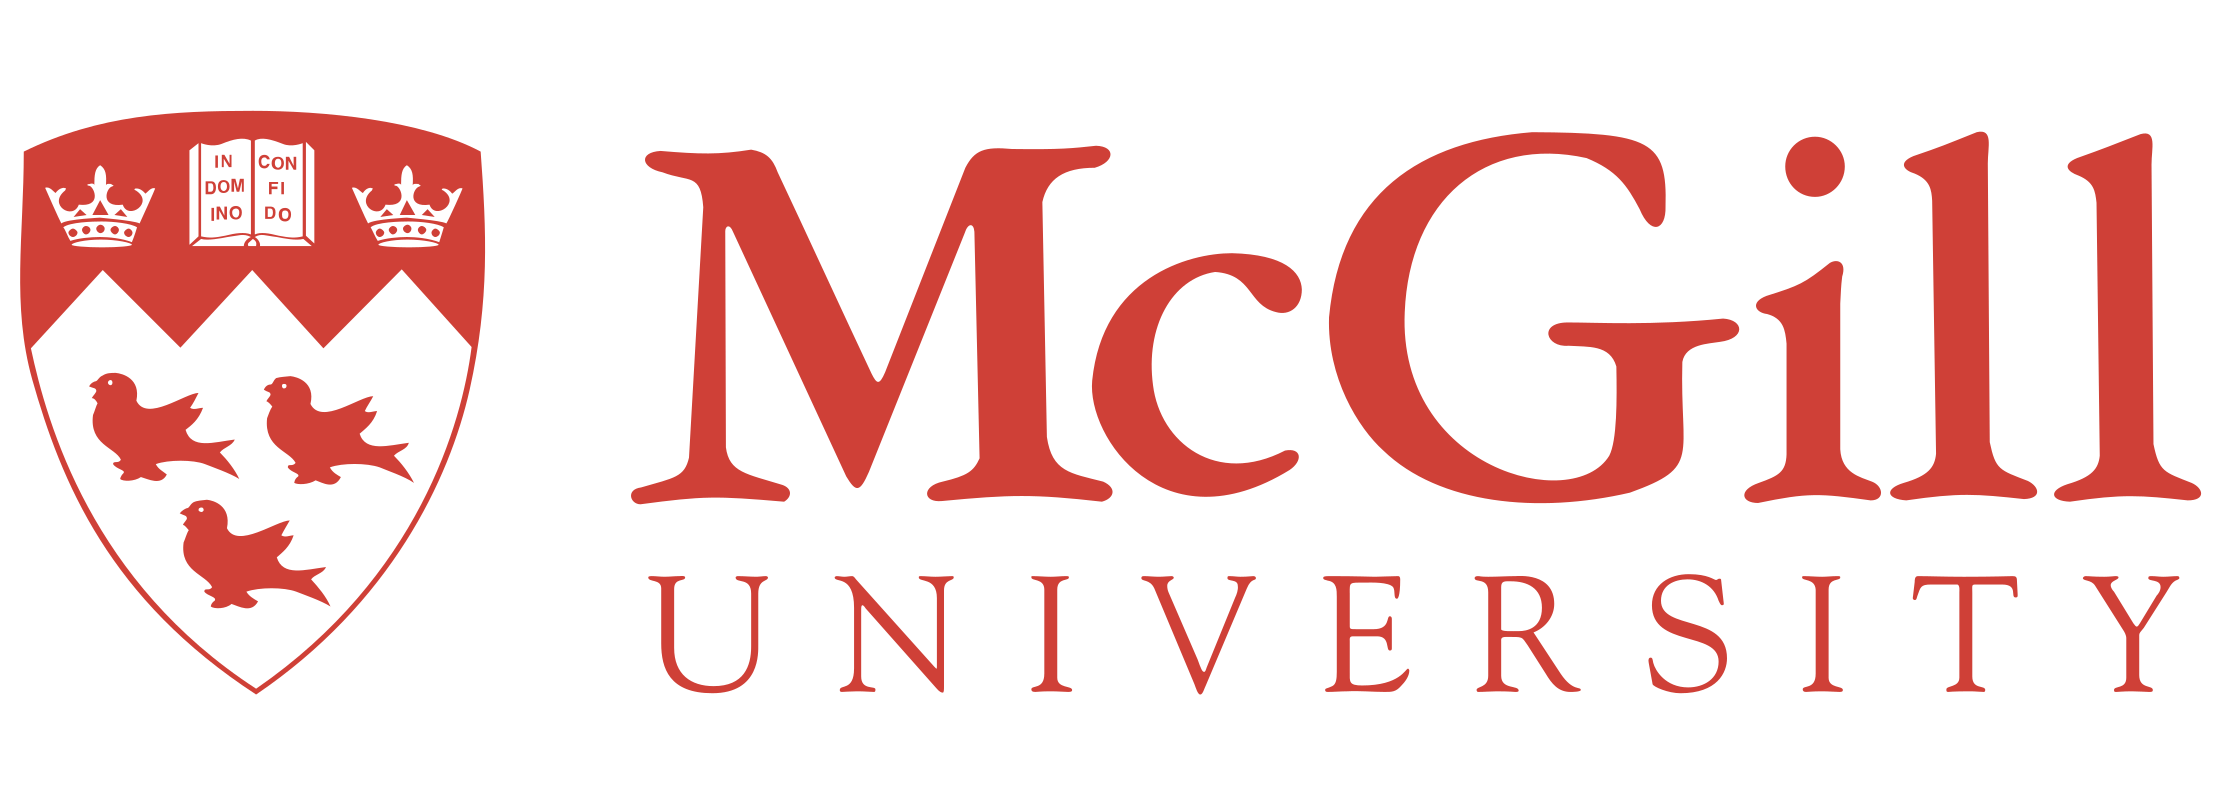 mcgill-university-logo-png-transparent-cropped.png